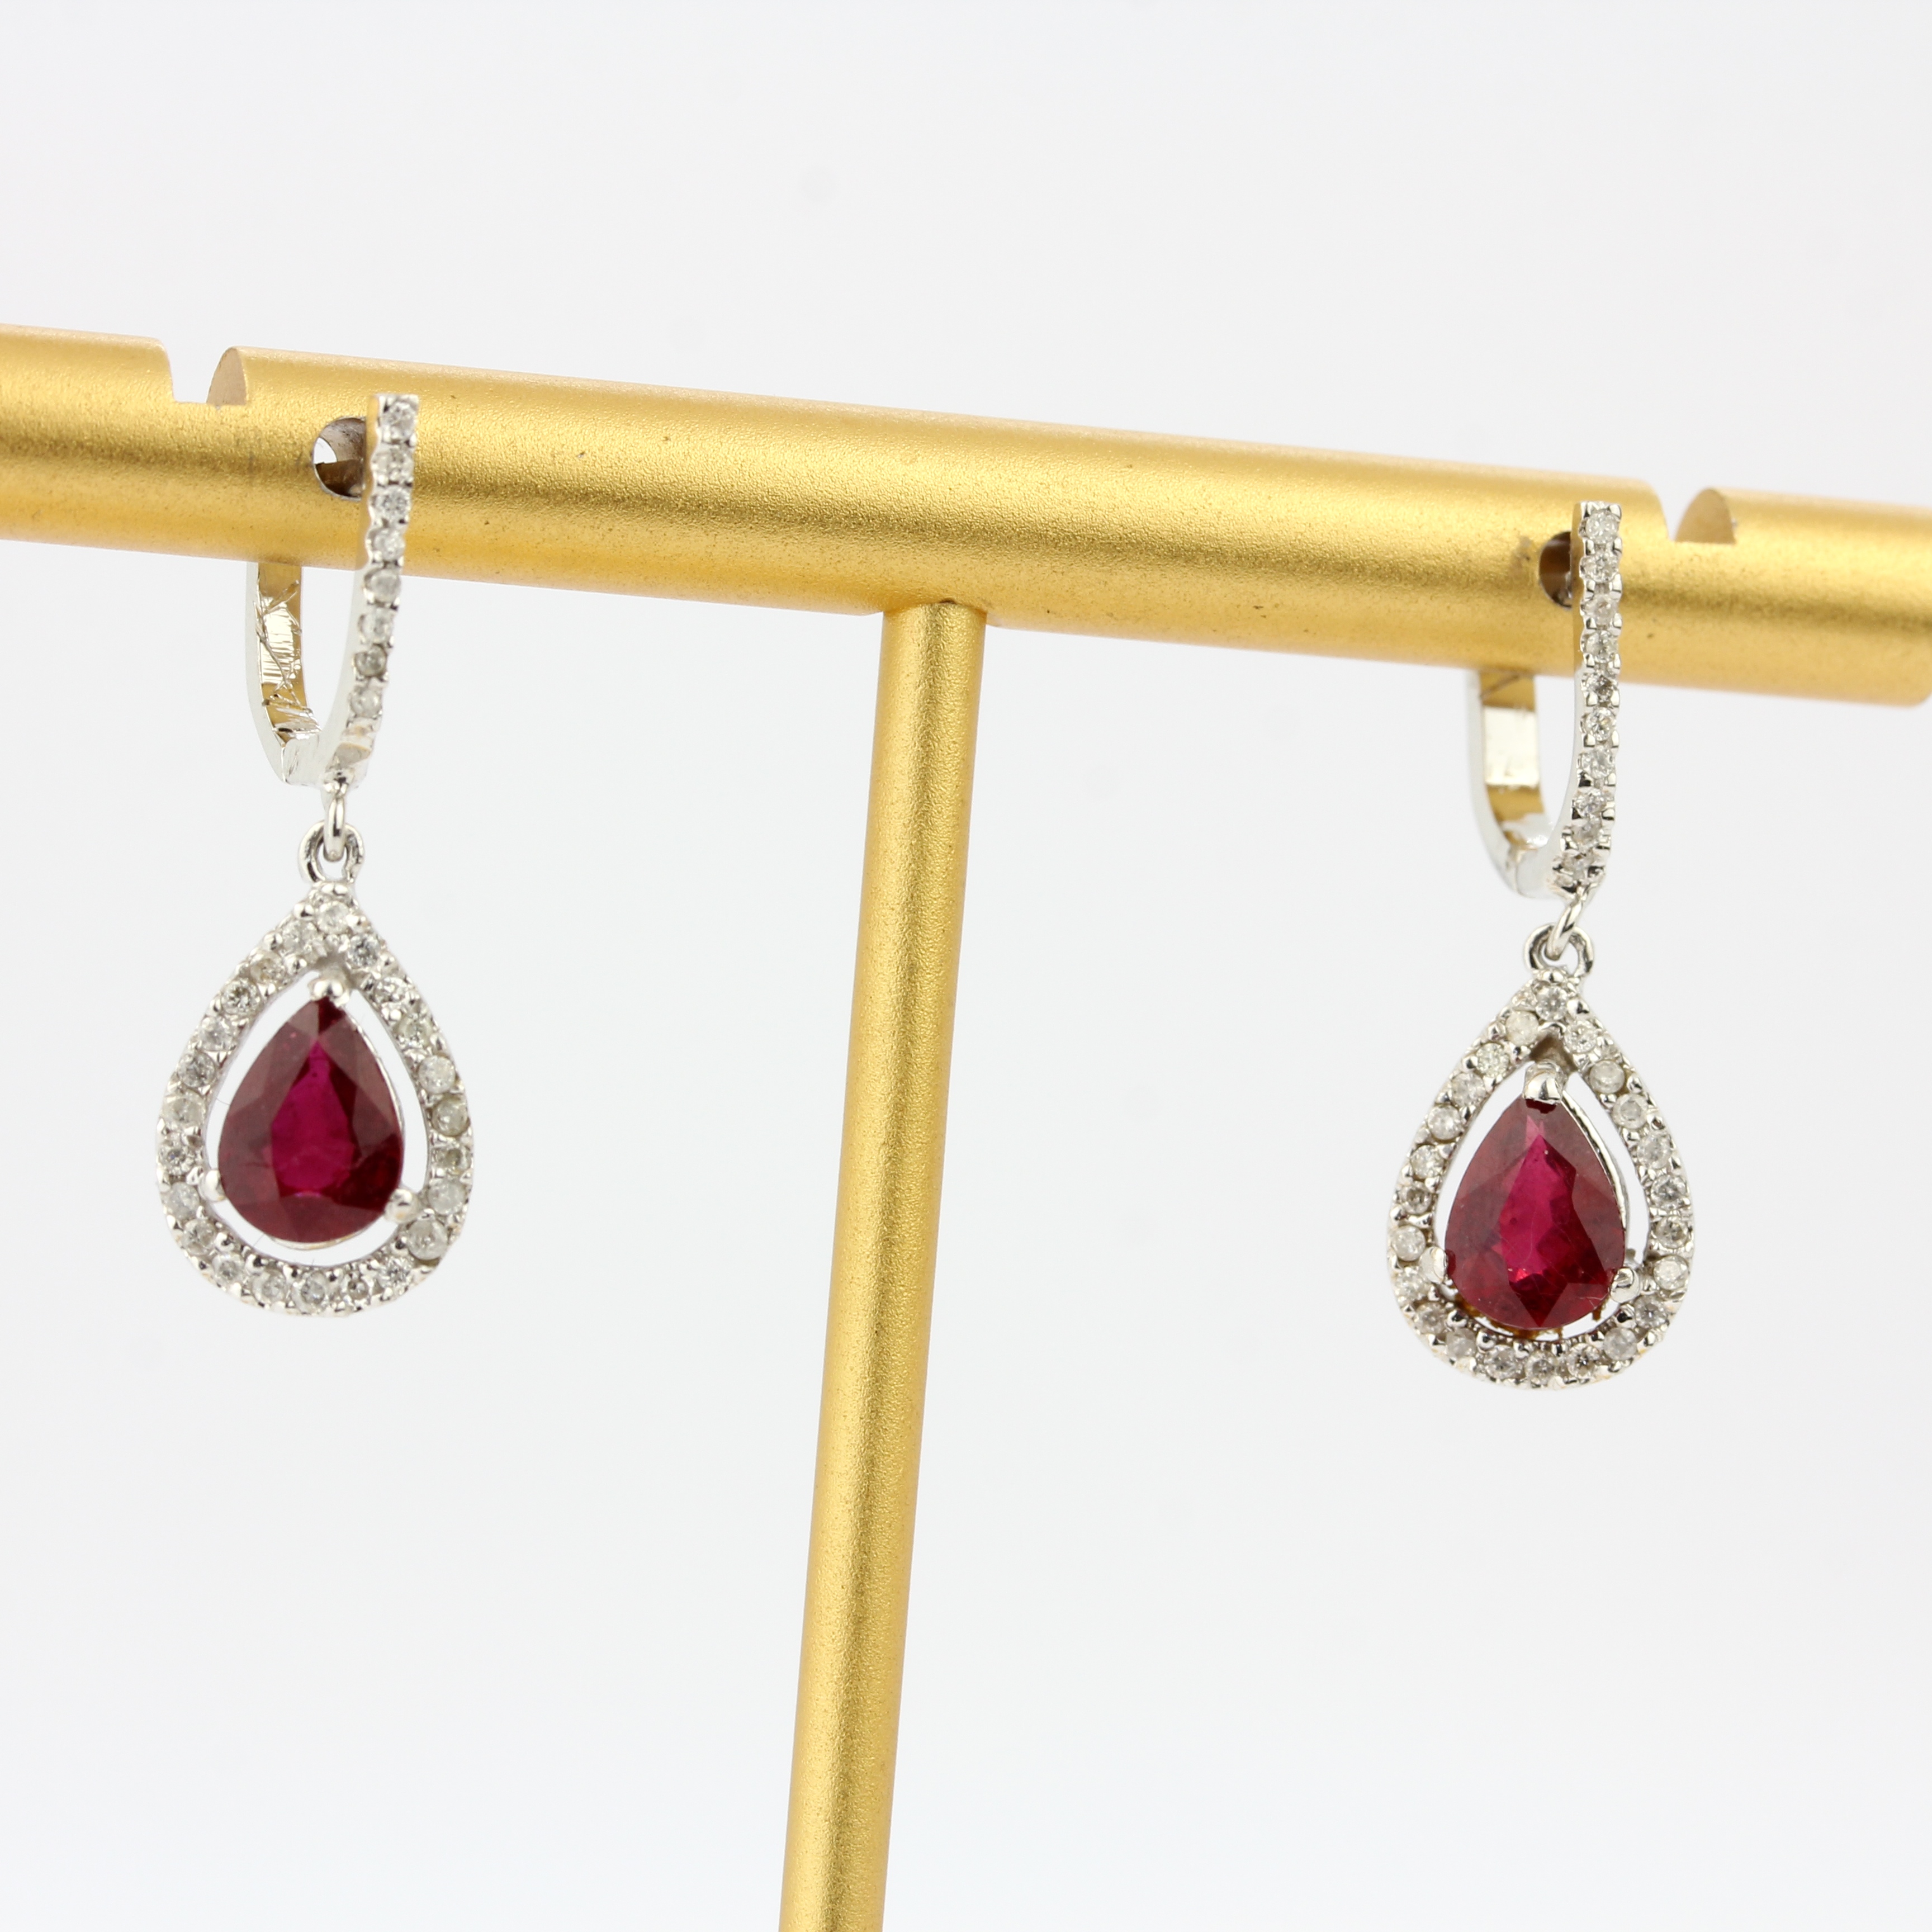 A pair of 18ct white gold drop earrings set with pear cut rubies and diamonds, L. 1.8cm. - Image 2 of 4